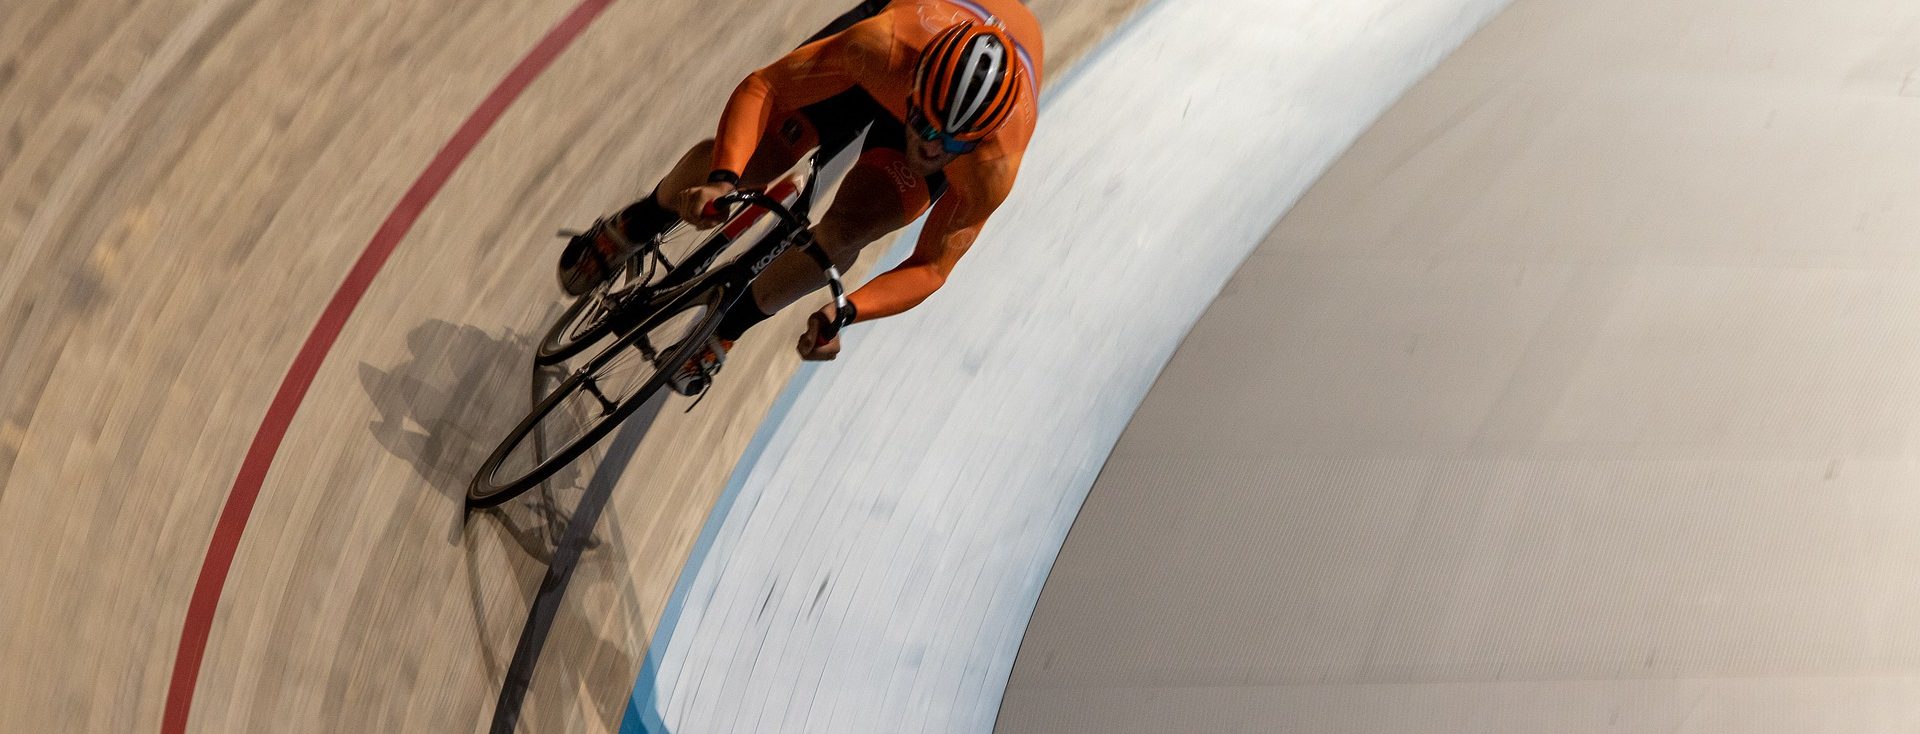 Track Cycling 2